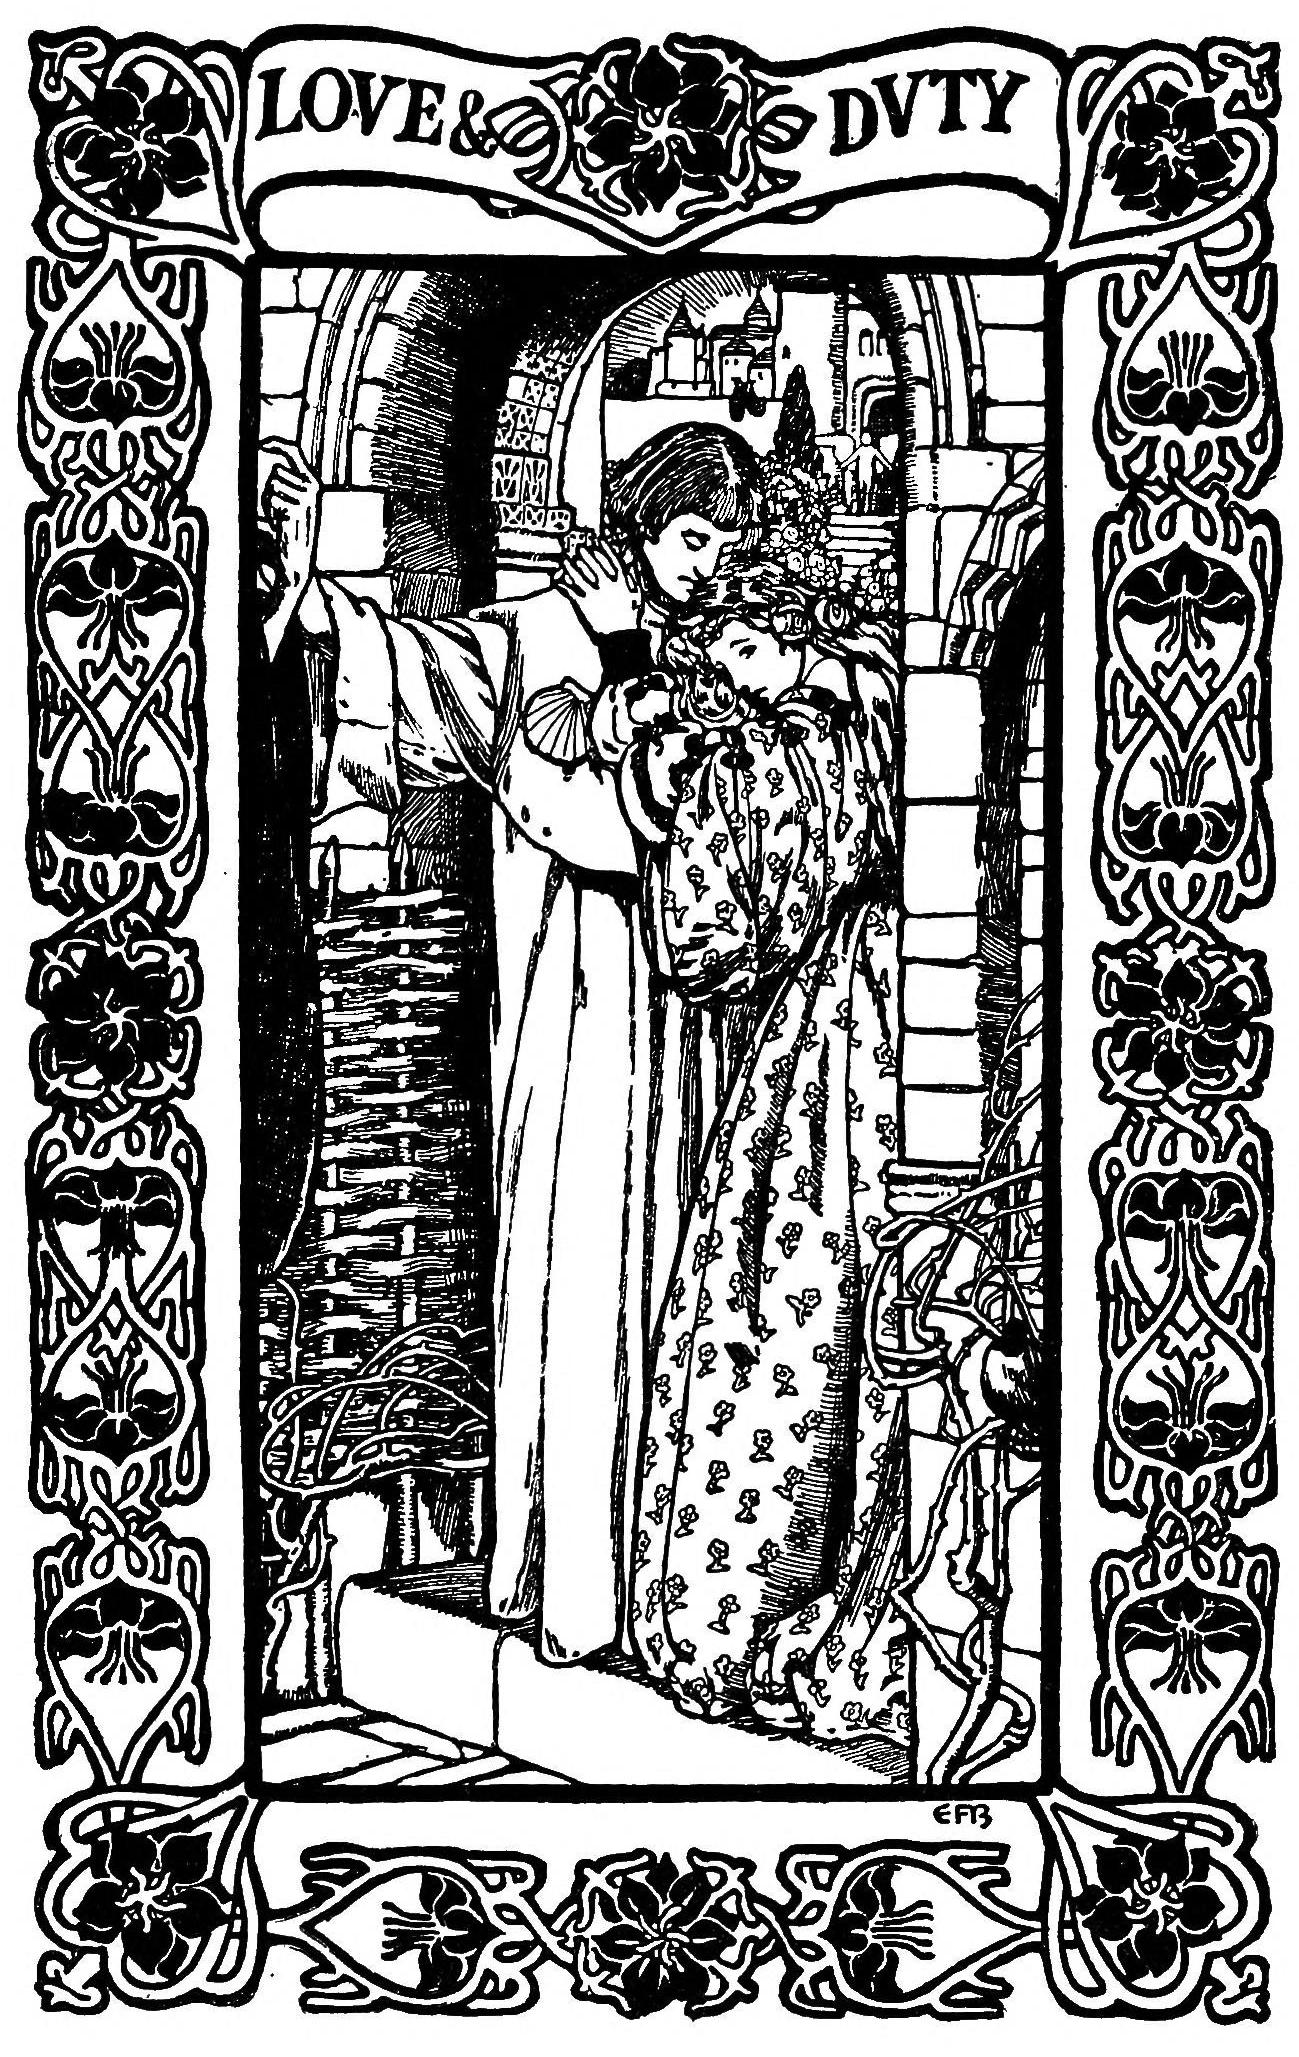 Love And Duty, from Poems by Alfred Lord Tennyson by Eleanor Fortescue Brickdale